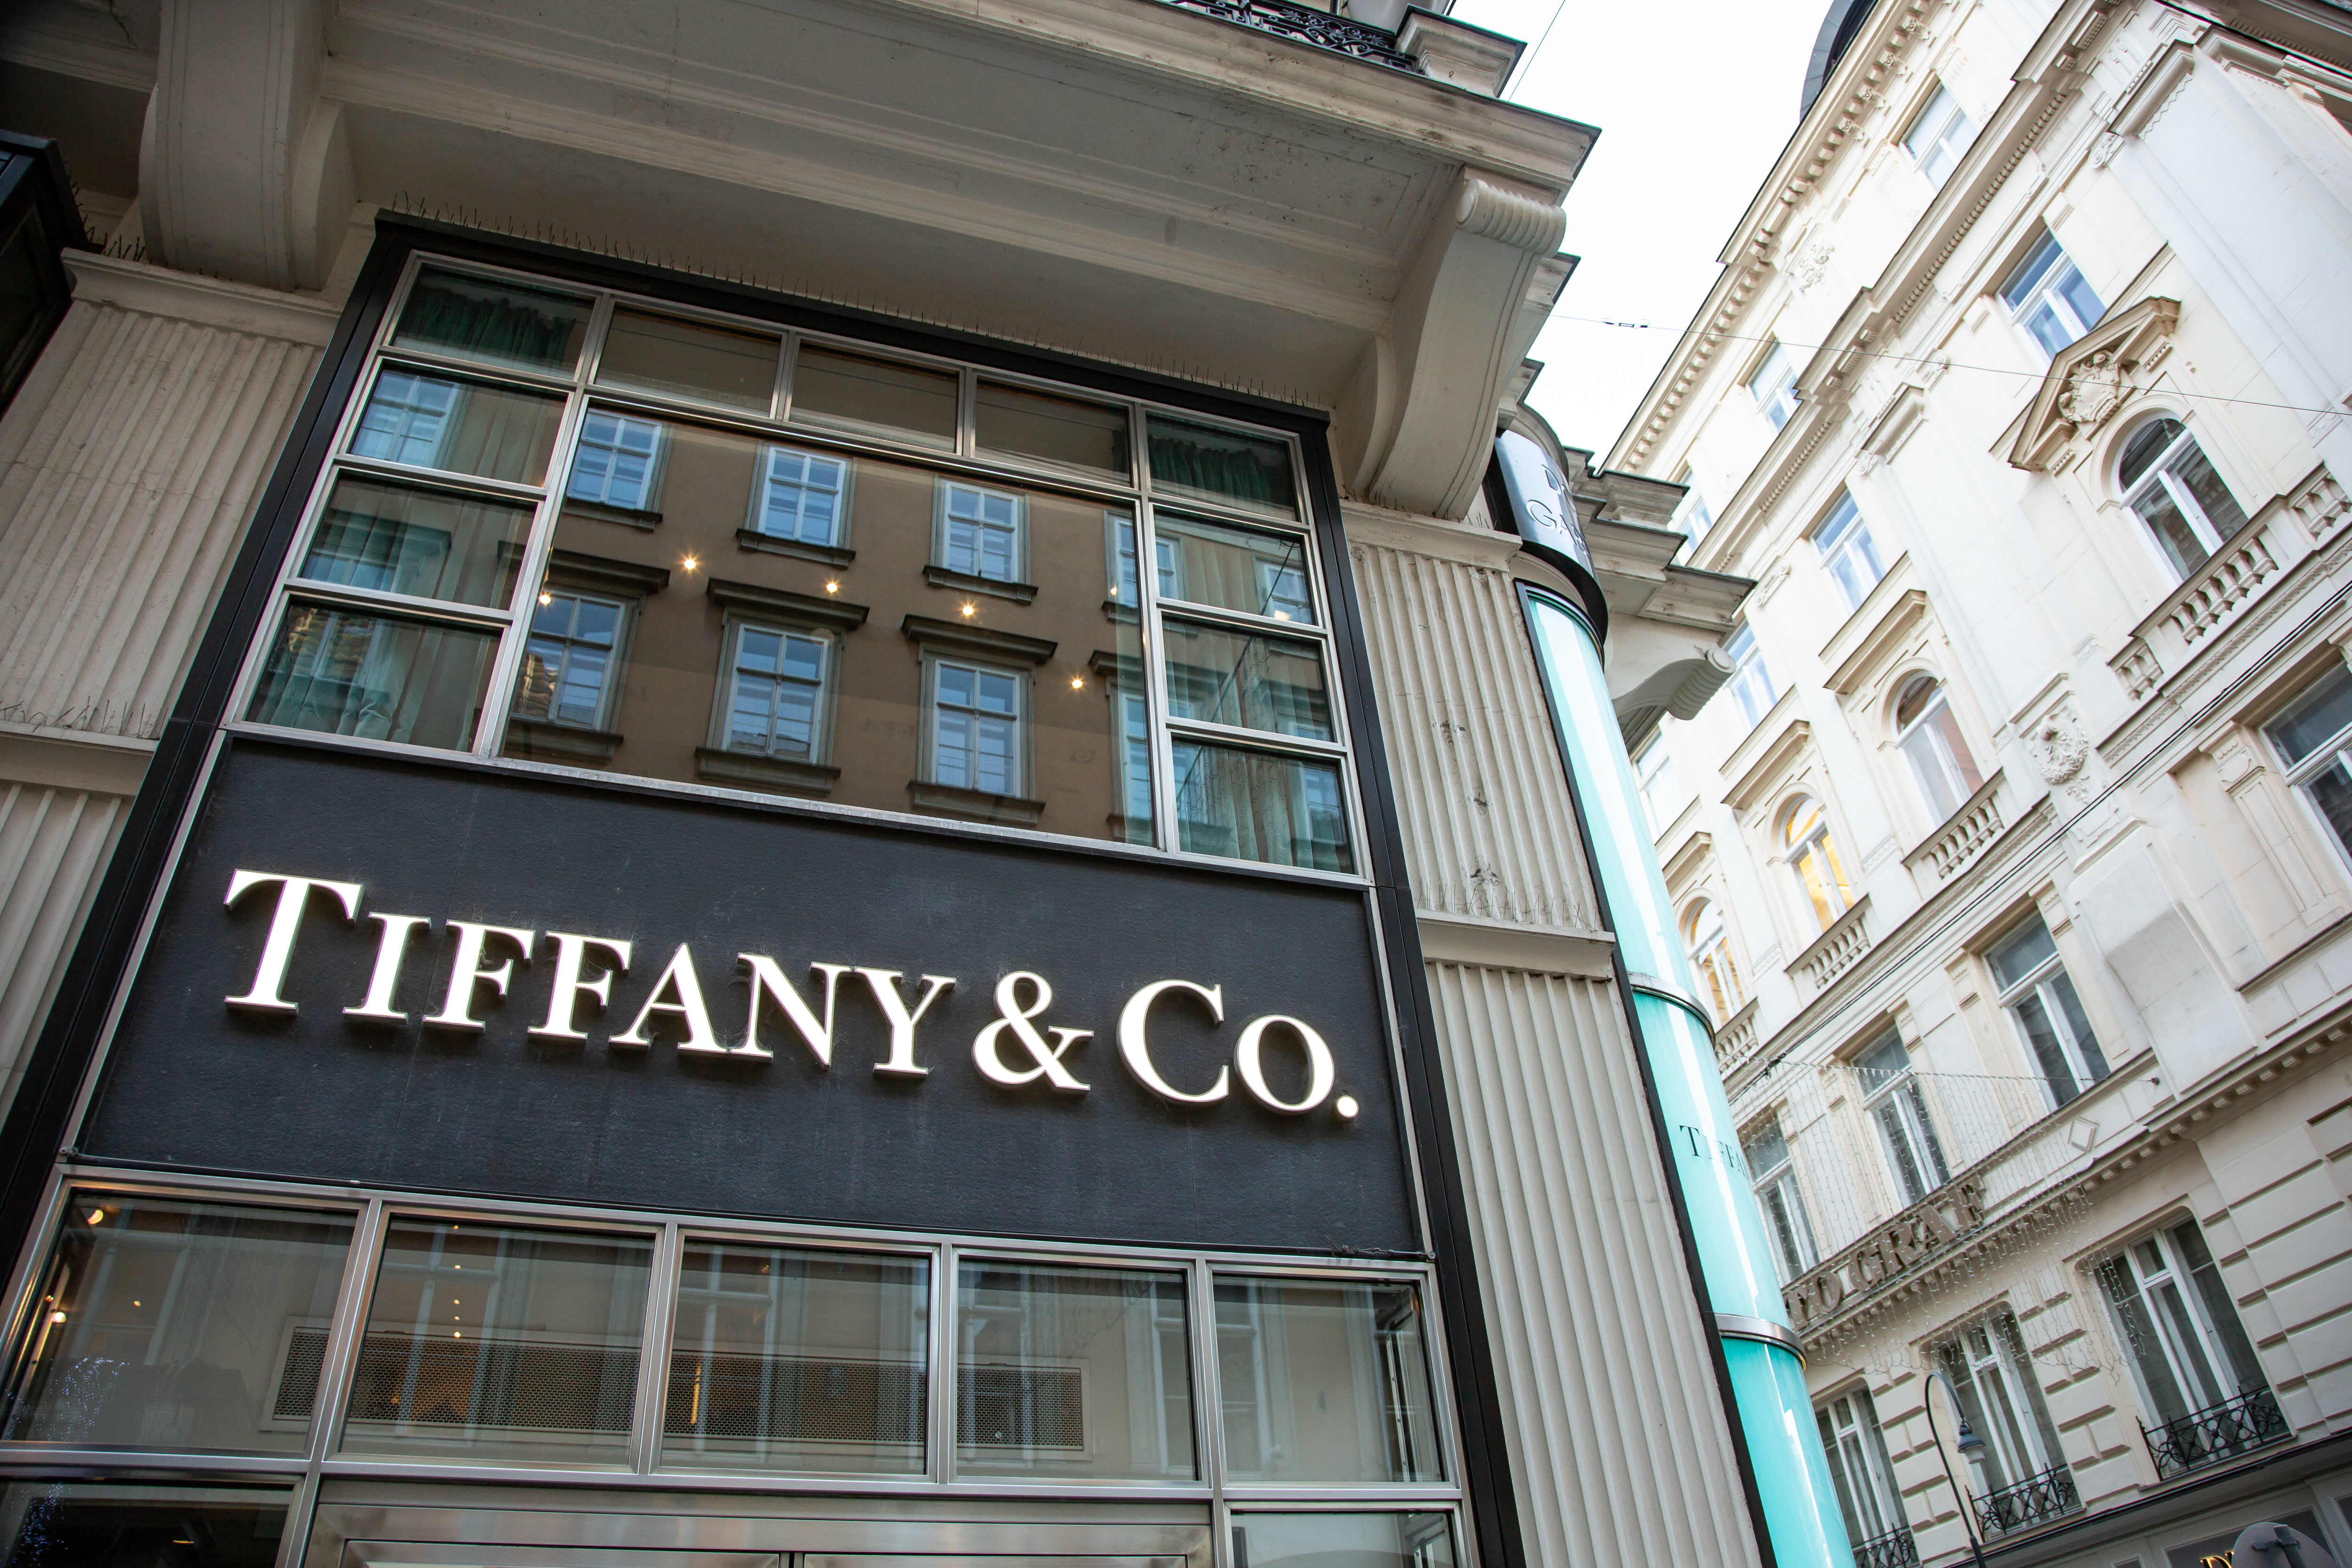 Takeover deal gone wrongLVMH and Tiffany & Co. - The European Financial  Review